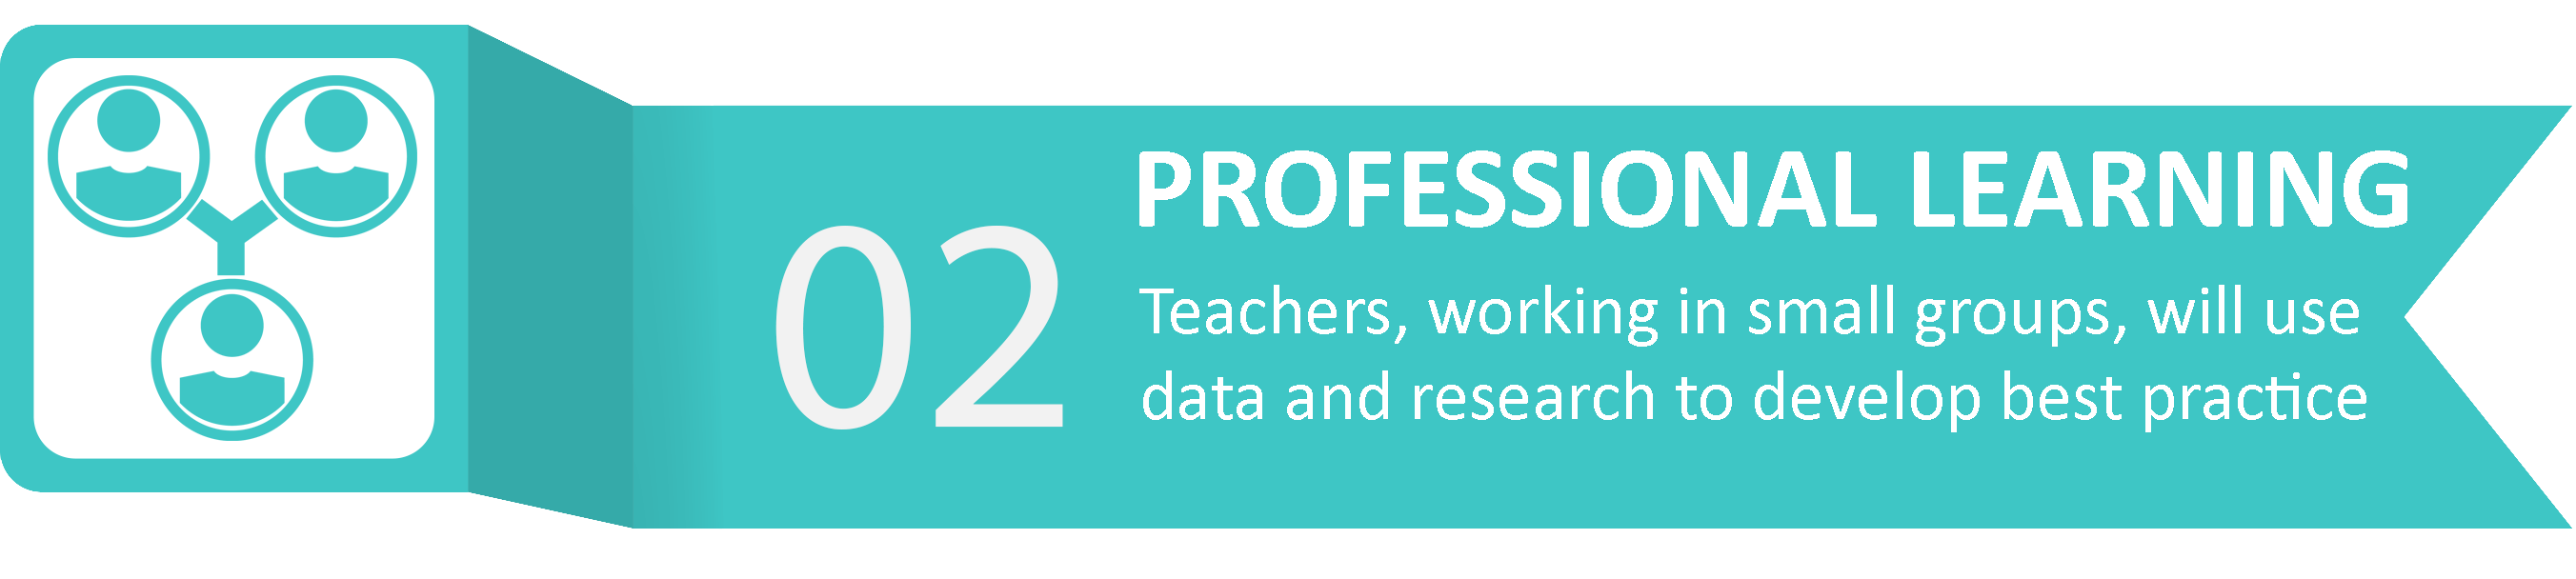 Professional Learning - Teachers, working in small groups, will use data and research to develop best practice.